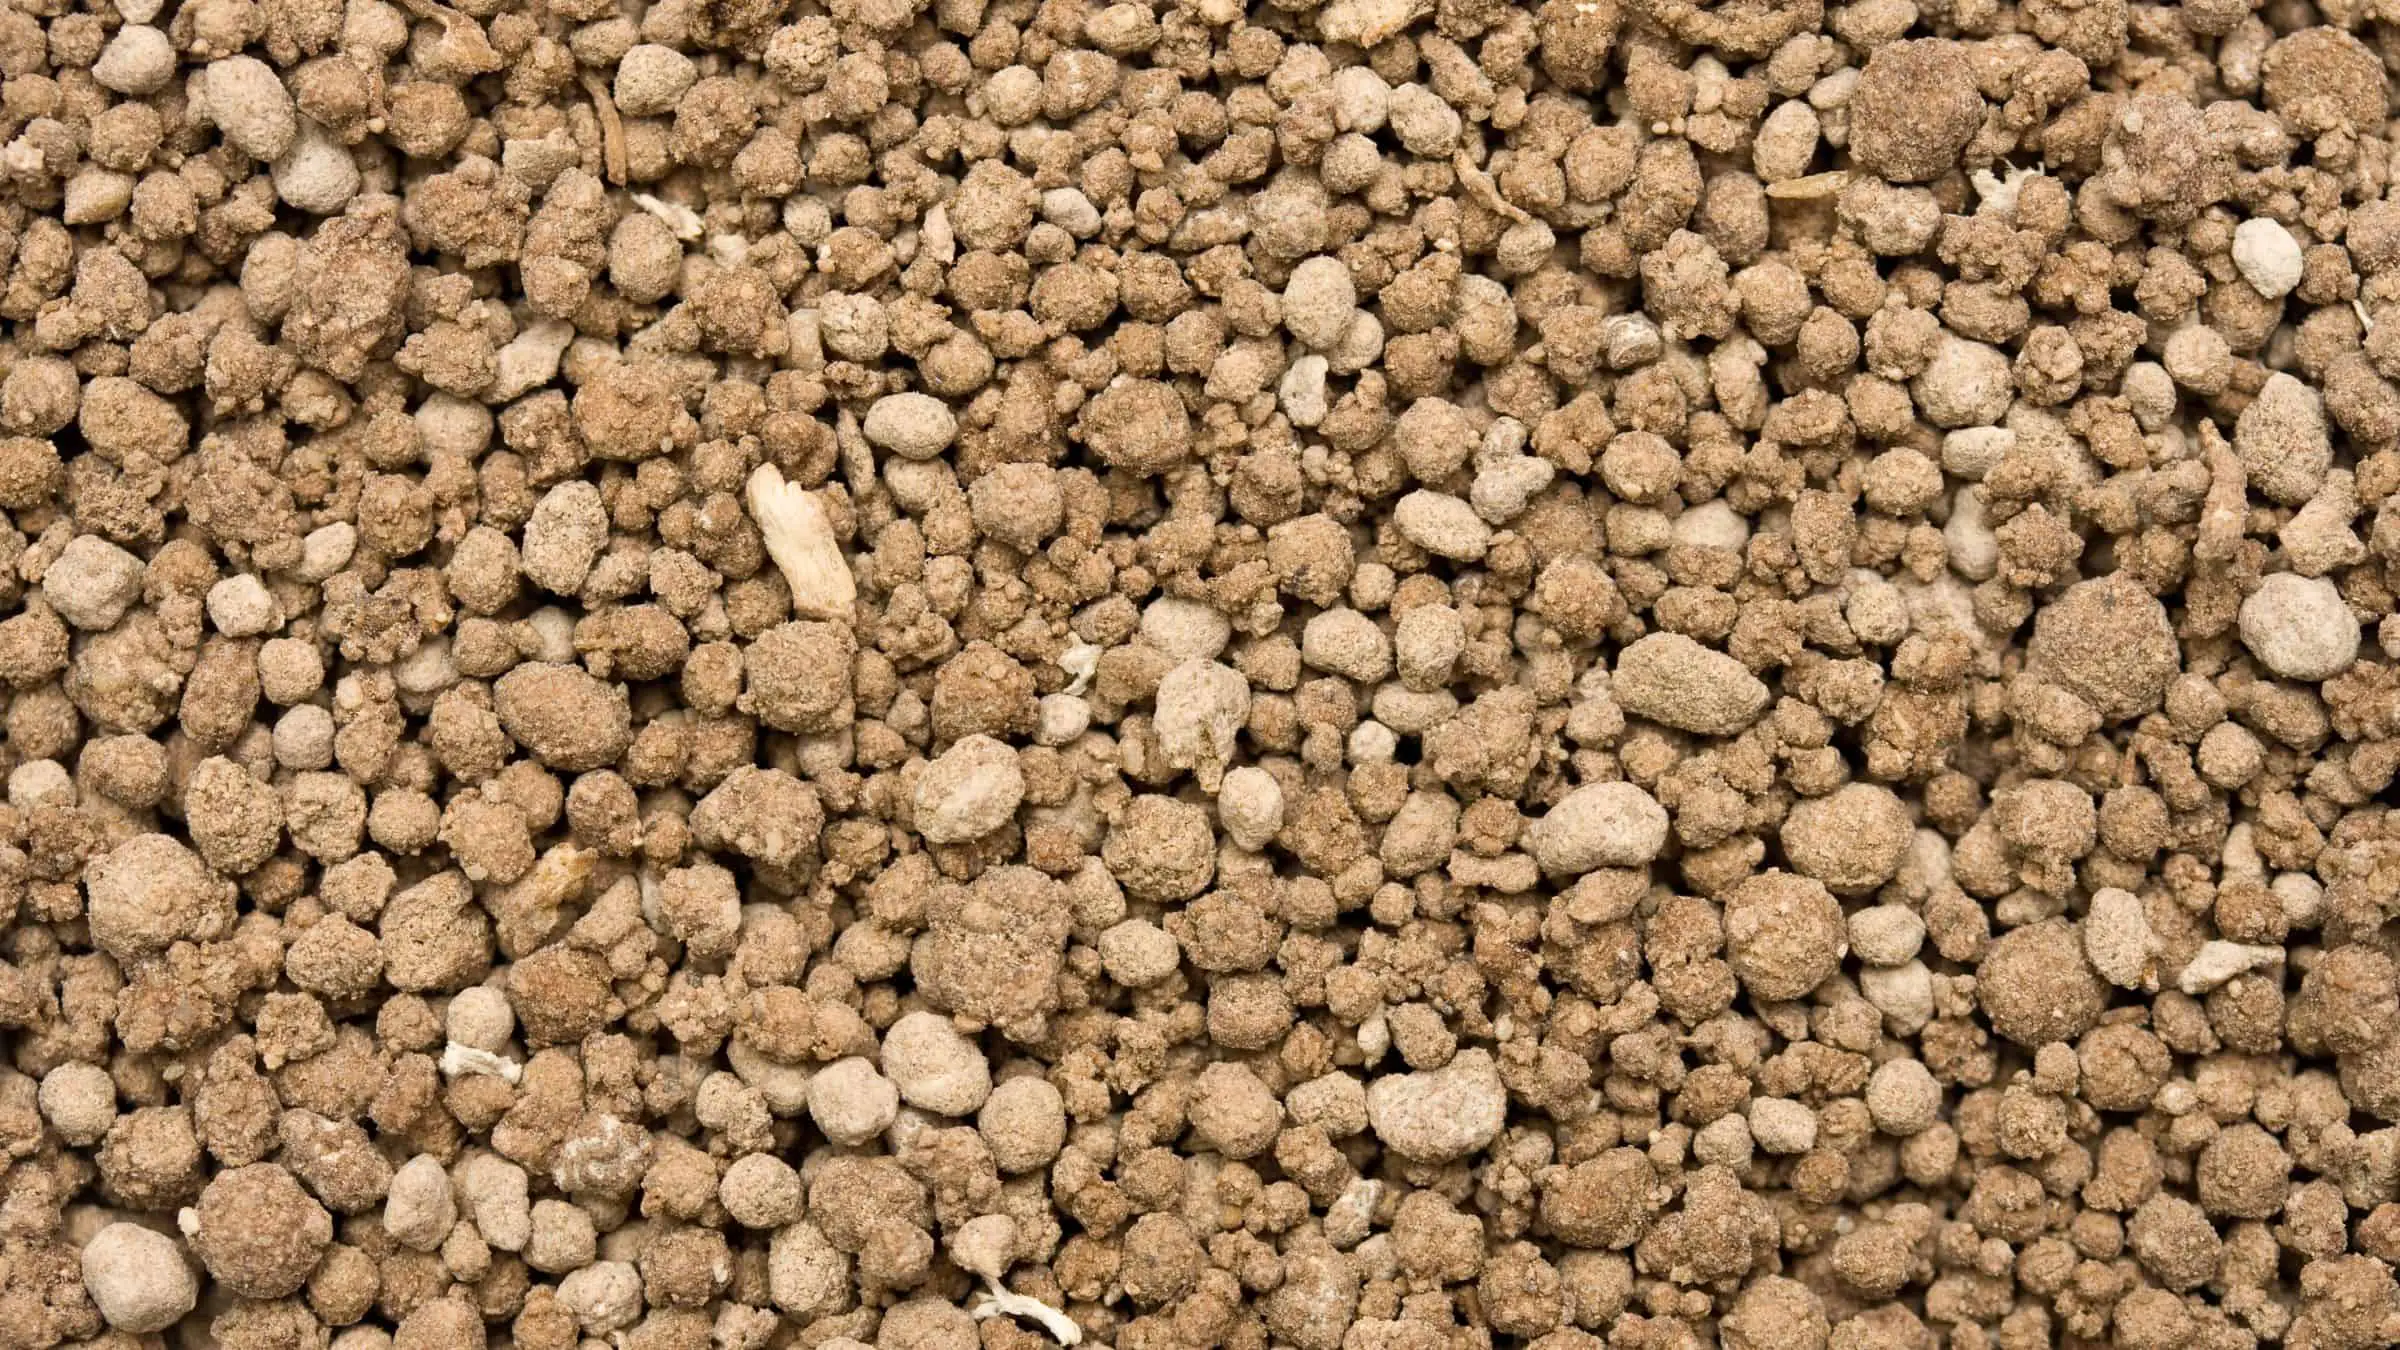 Bone Meal granules ready to apply to your garden